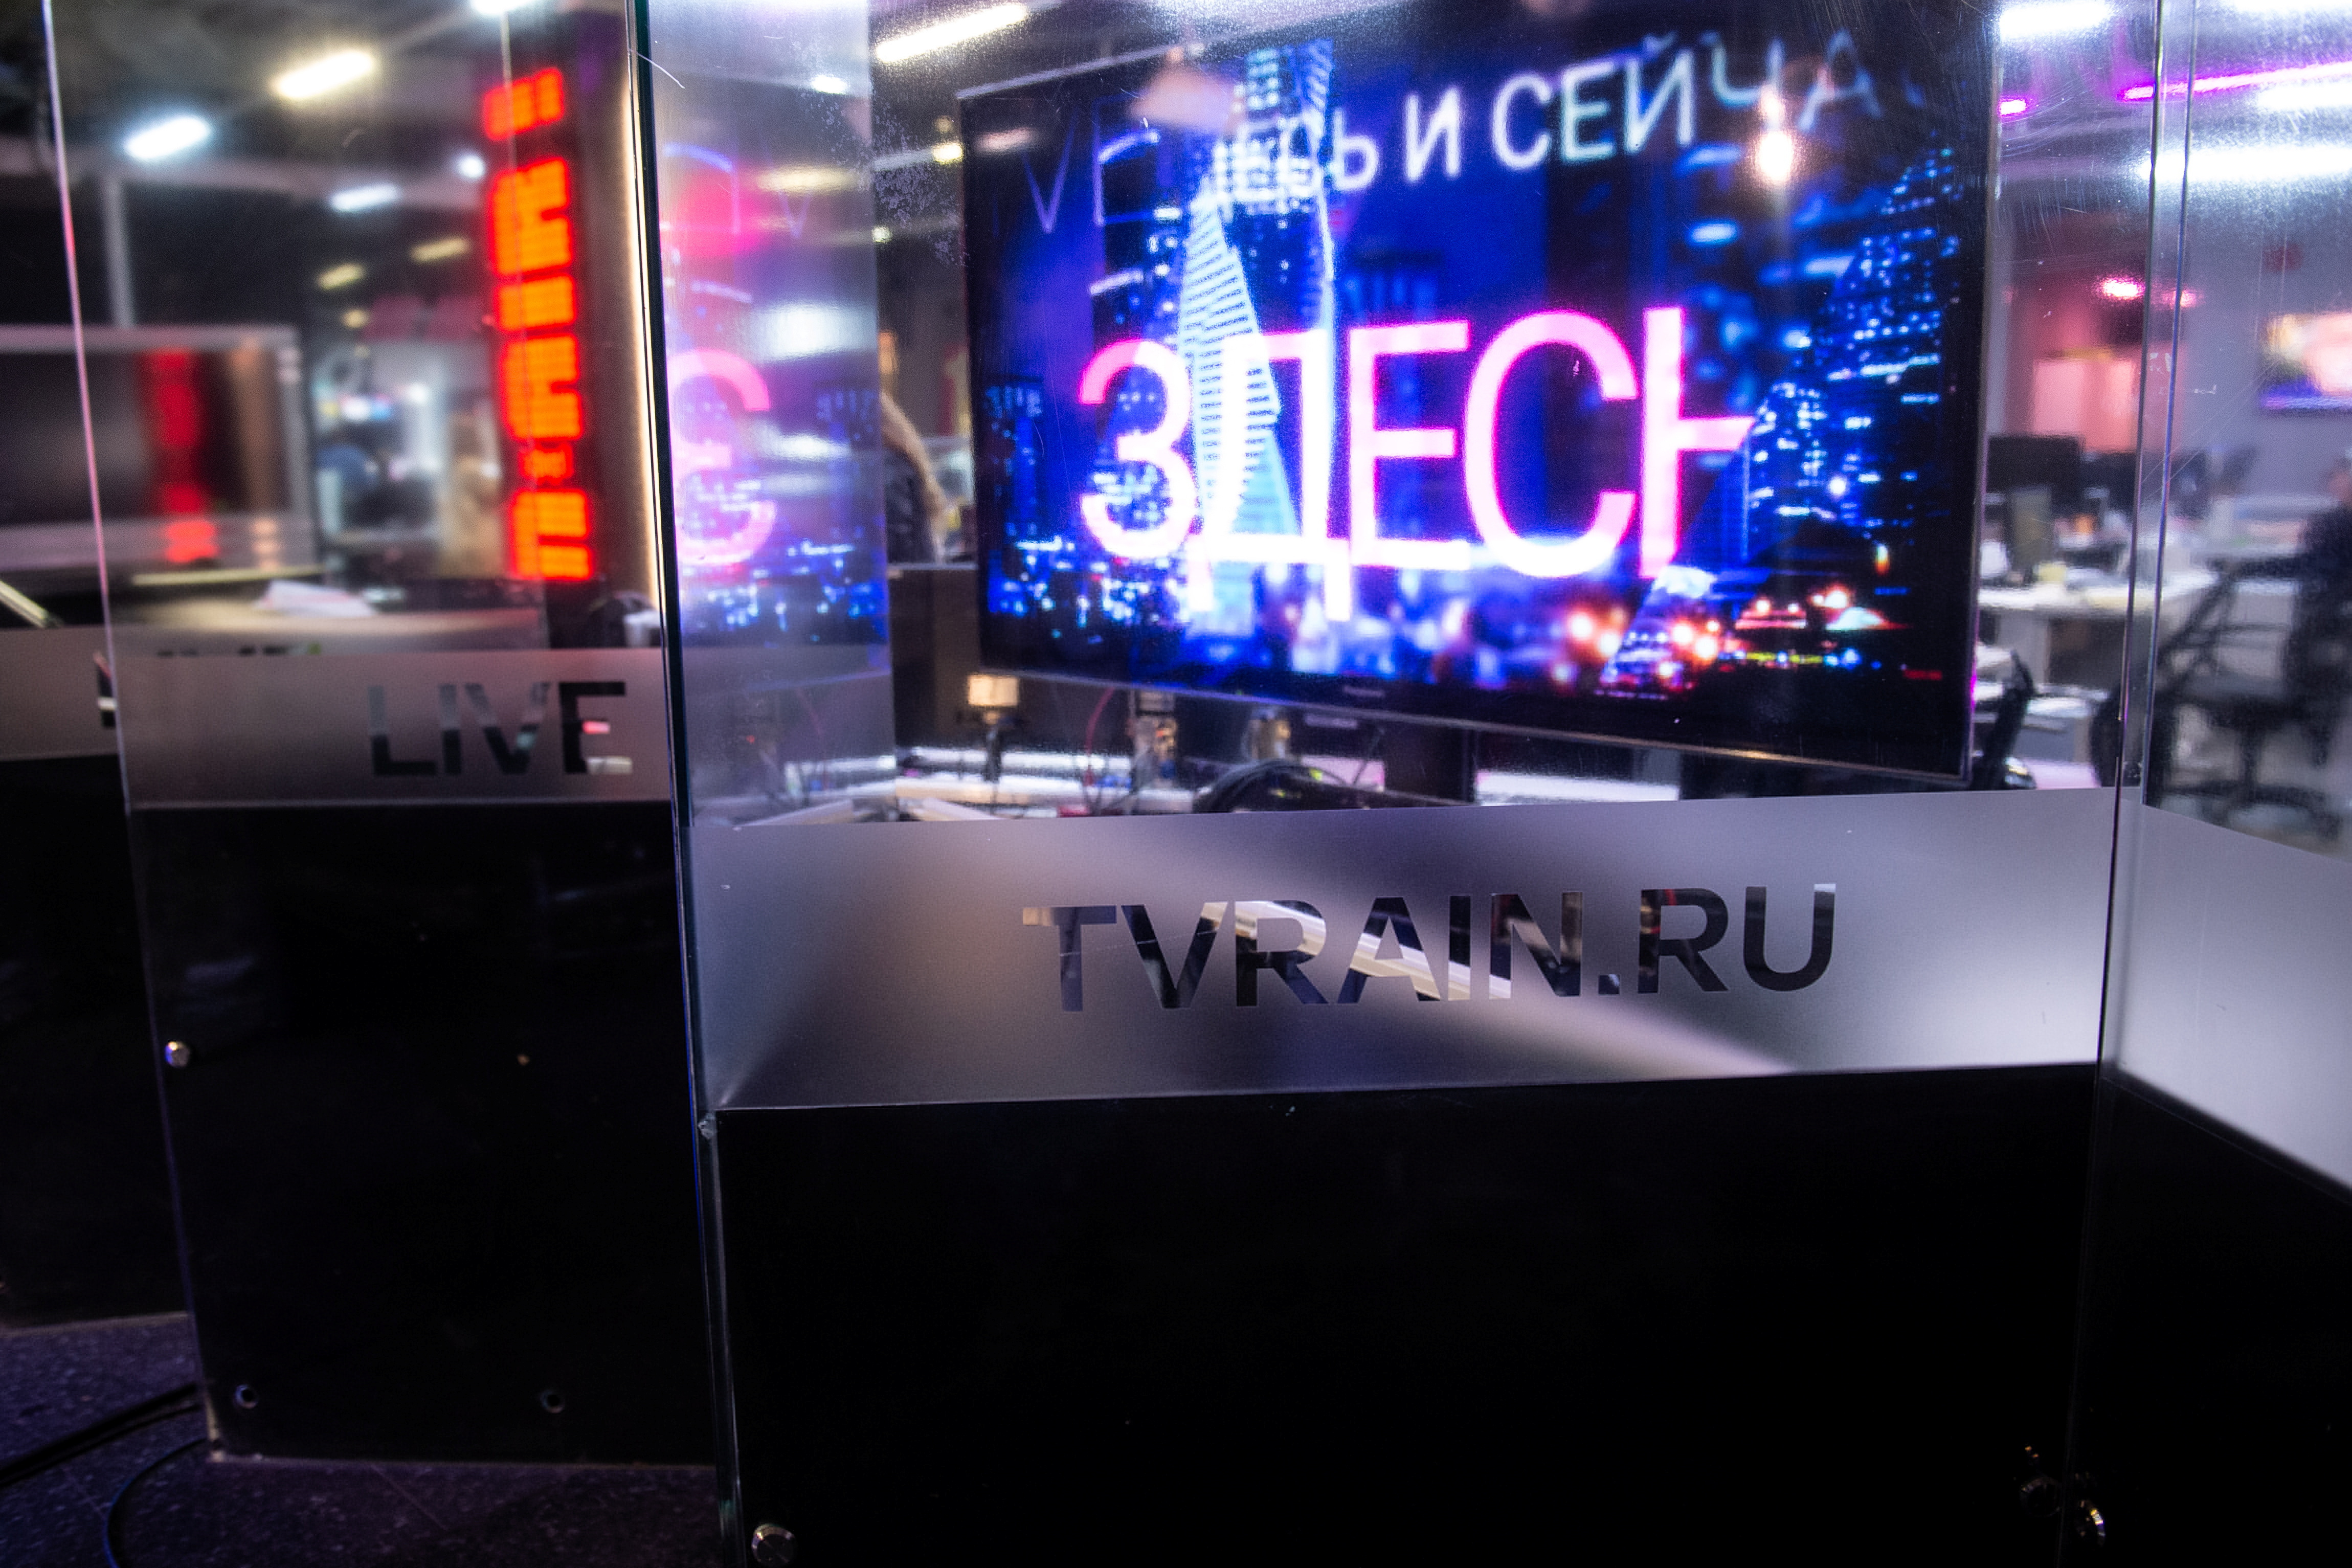 A view of the TV Rain (Dozhd) online news channel studio in Moscow